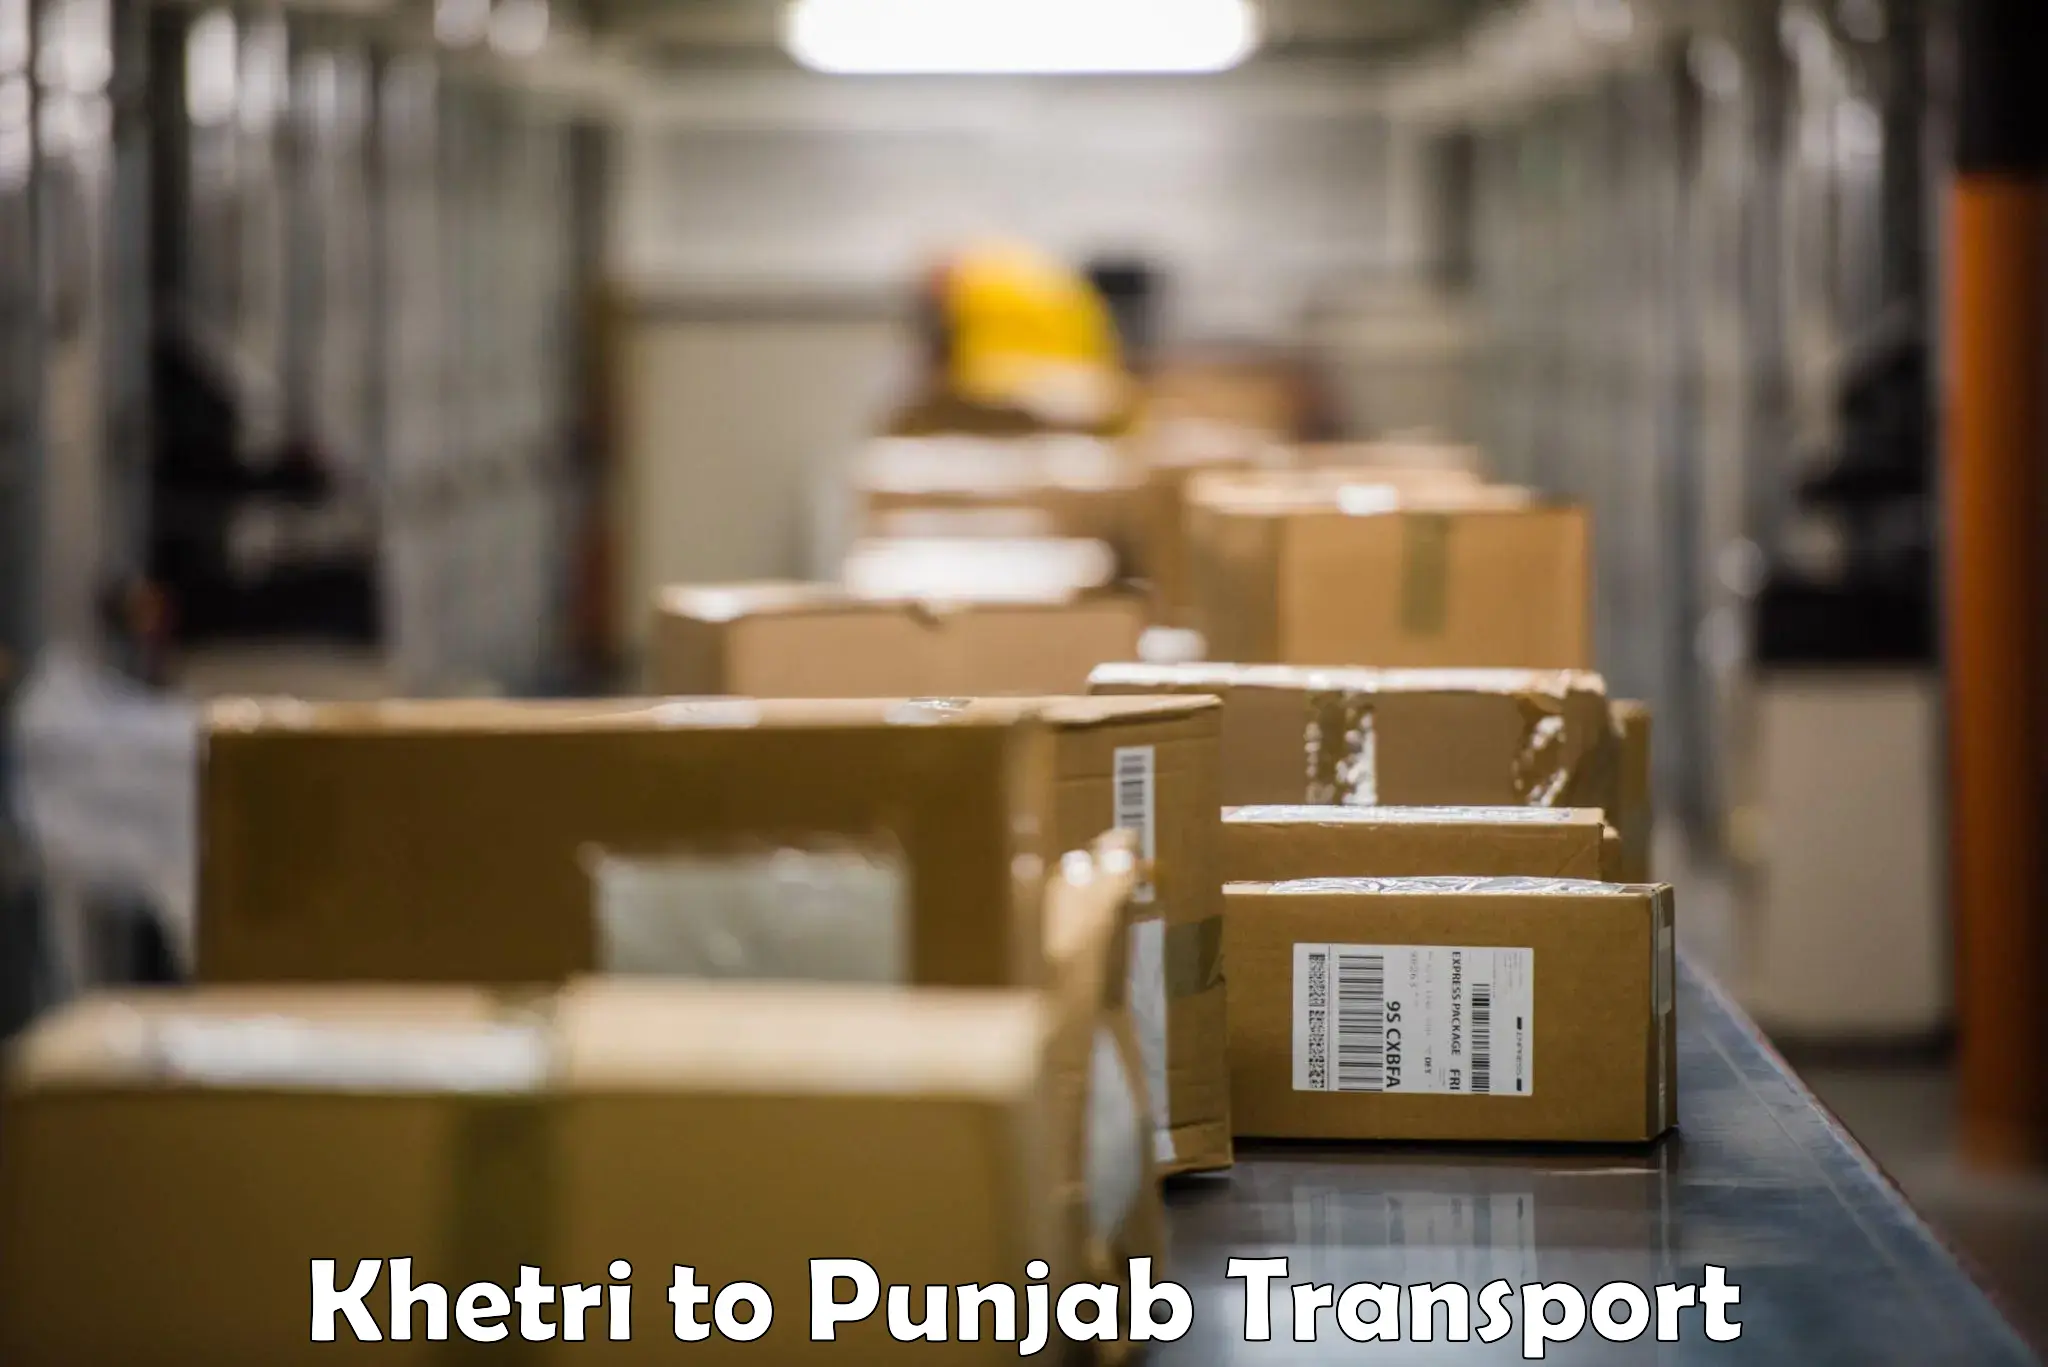 Container transport service in Khetri to Goindwal Sahib